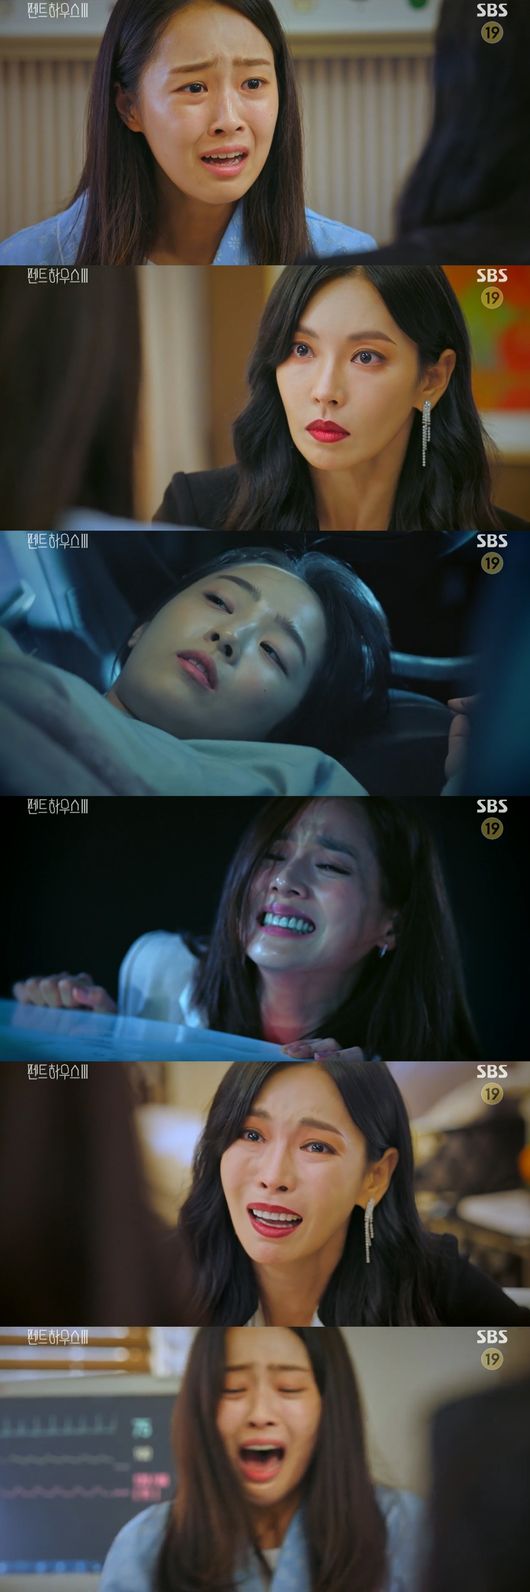 Choi Ye-bin seen Kim So-yeon kill EugeneIn the SBS Friday drama Penthouse broadcast on the 9th, HAEUN star (Choi Ye-bin) witnessed the death of Oh Yoon-hee and Furiously to Chun Seo-jin (Kim So-yeon).But Judantae said, Why are you quiet even if you know that? Is not it because Oh Yoon-hee should be a bad person? We were on the same boat.We do not want our ship to sink. Chun Seo-jin threw a bouquet of flowers and was angry.The HAEUN star woke up in a coma. I have some good news. You passed Seoul Music University.Its been acknowledged that Bae Rona cheated, he said. Forget all the bad memories. HAEUN star said, I remember my mothers eyes before I die.I am going to be a monster soon, he said, when I meet someone before I die and I lose my soul.Then the HAEUN star said, My aunts mother killed her. She pushed her car. Why did you do it?When Oh Yoon-hee died, the HAEUN star was actually awake. HAEUN star watched the scene where Chun Seo-jin pulled himself out of the car and pushed the car to death.She tried to save me, how can she kill someone who wants to save me when she has stayed to the end? said Chun Seo-jin.I had a nightmare, said HAEUN star. I got out of Jin Sam because of Rona, and I was guilty again.I did it for you, said Chun Seo-jin. How did my mother come back here and she was treated like a person in prison.If you want to see your mother go back, you should report it. HAEUN star begged, Let me eat the medicine that removes Memory before.I want to go to Seoul National University. I want to make a Boy friend. Please get me some medicine. Chun Seo-jin asked, Everyone is going through one difficult thing. Its for you, but I should cover up my mothers breakdown.The HAEUN star was so angry that grandfather and Rona mother were all killed because of me.